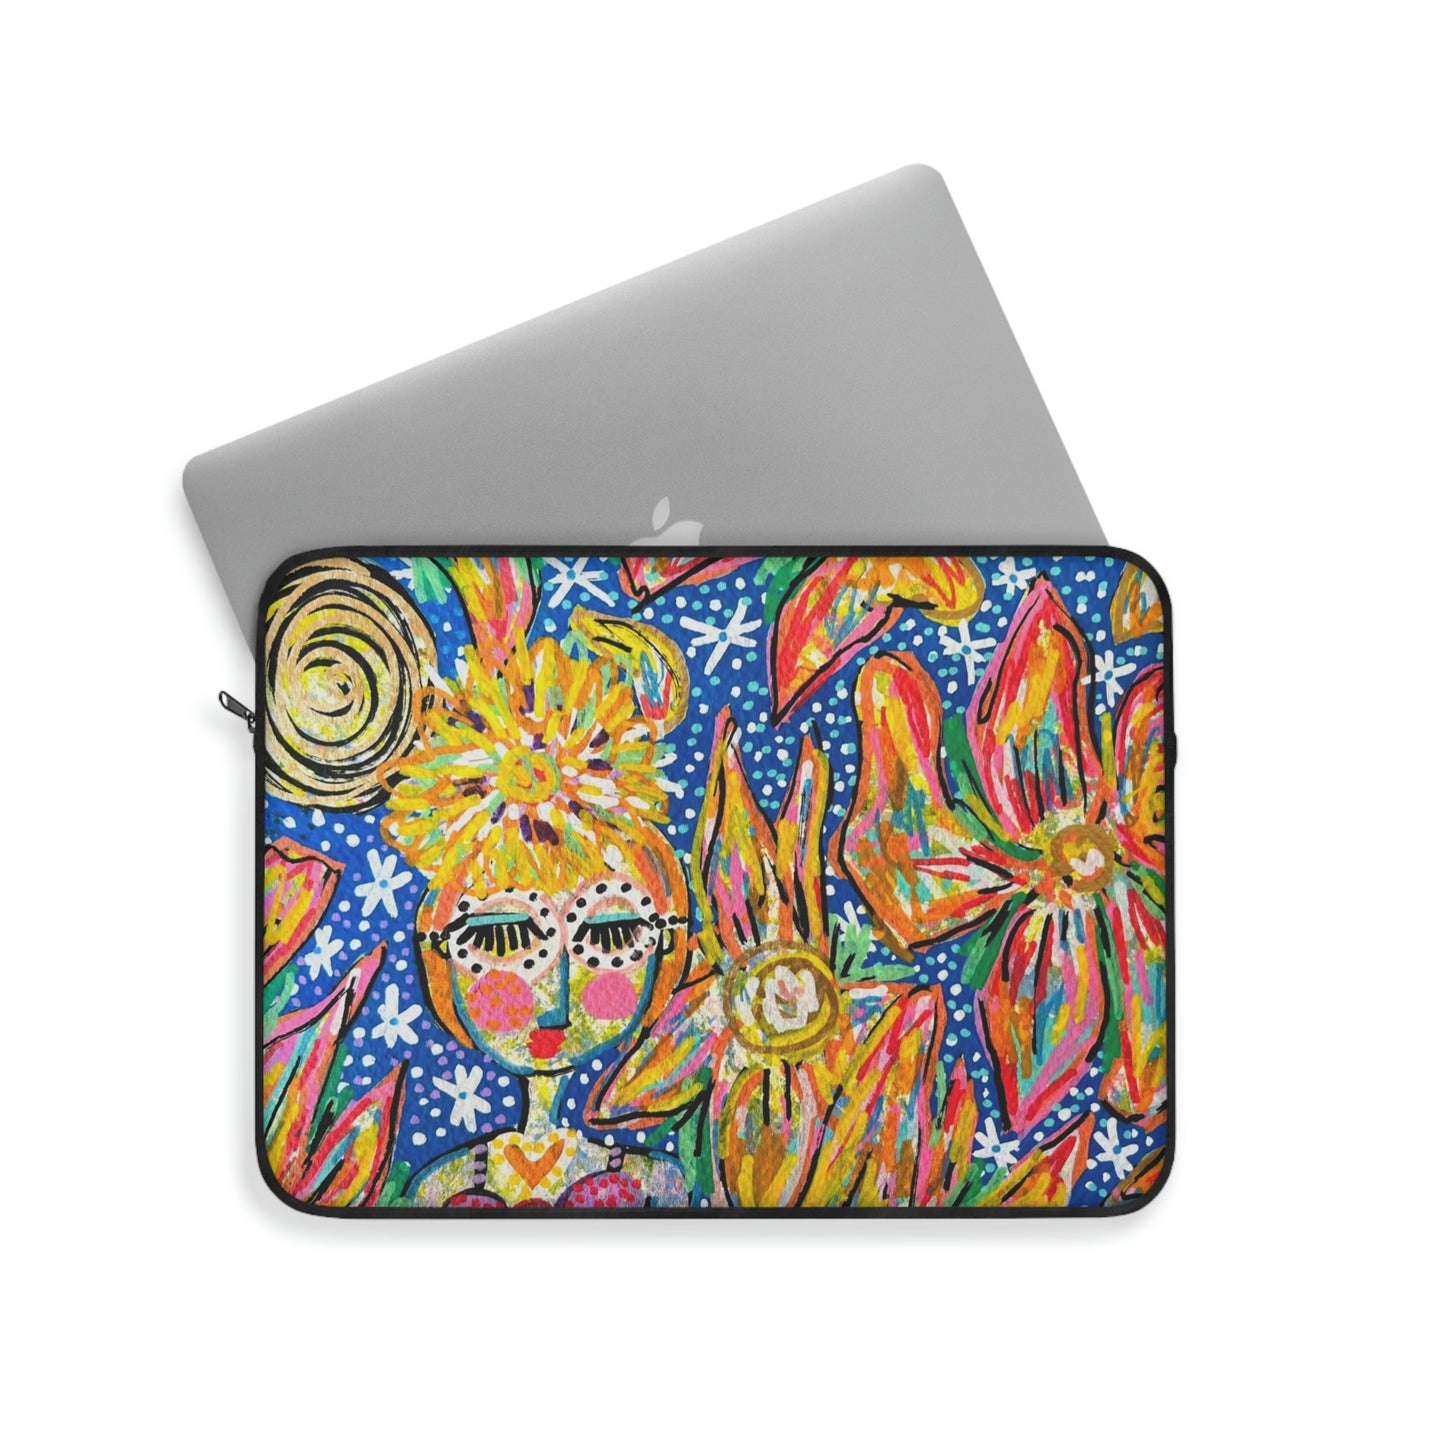 "May All Your Dreams Come True" Laptop Sleeve